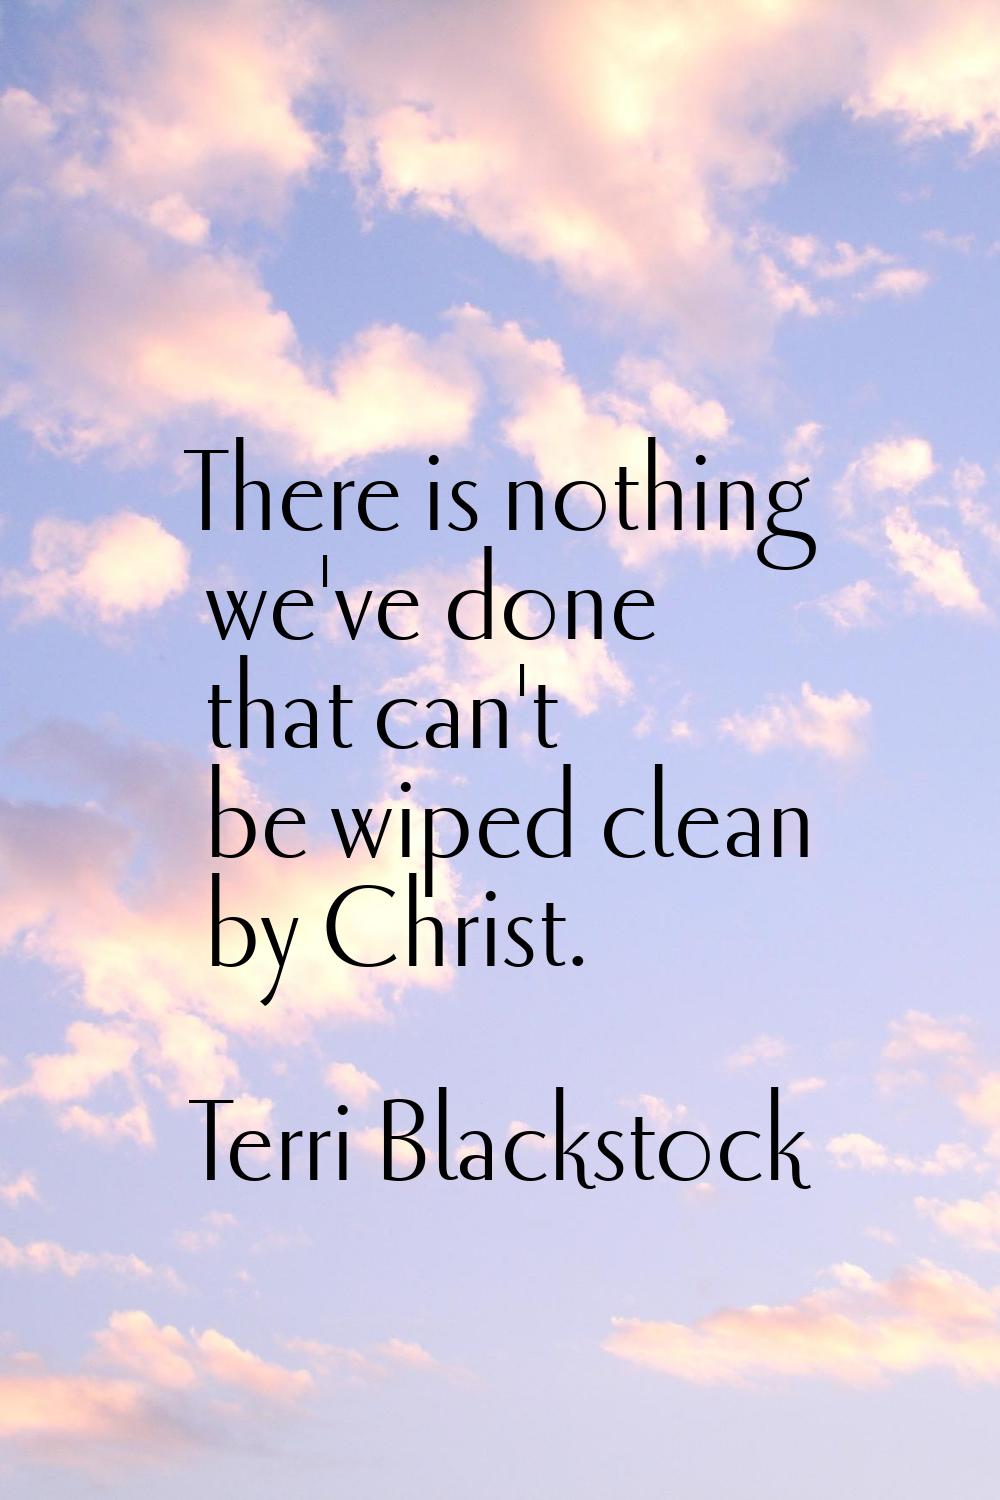 There is nothing we've done that can't be wiped clean by Christ.